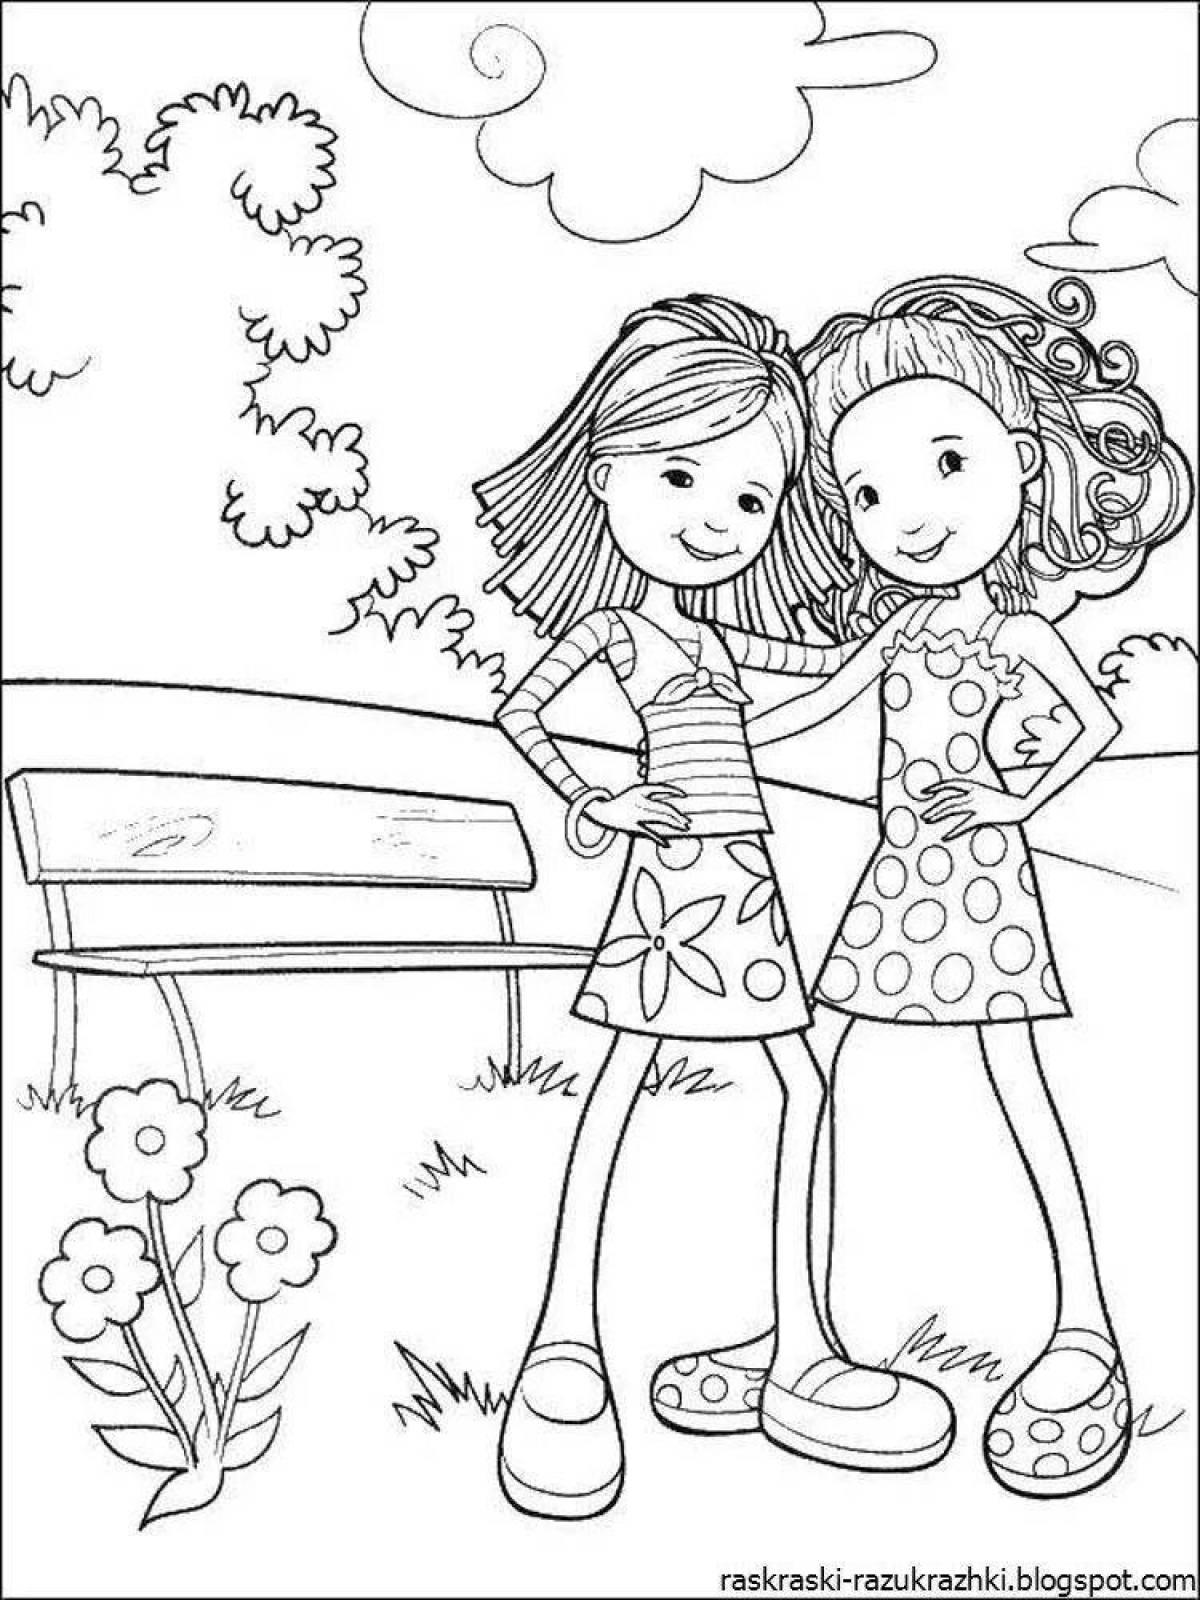 Amazing coloring book for girls 8 years old, 2nd grade